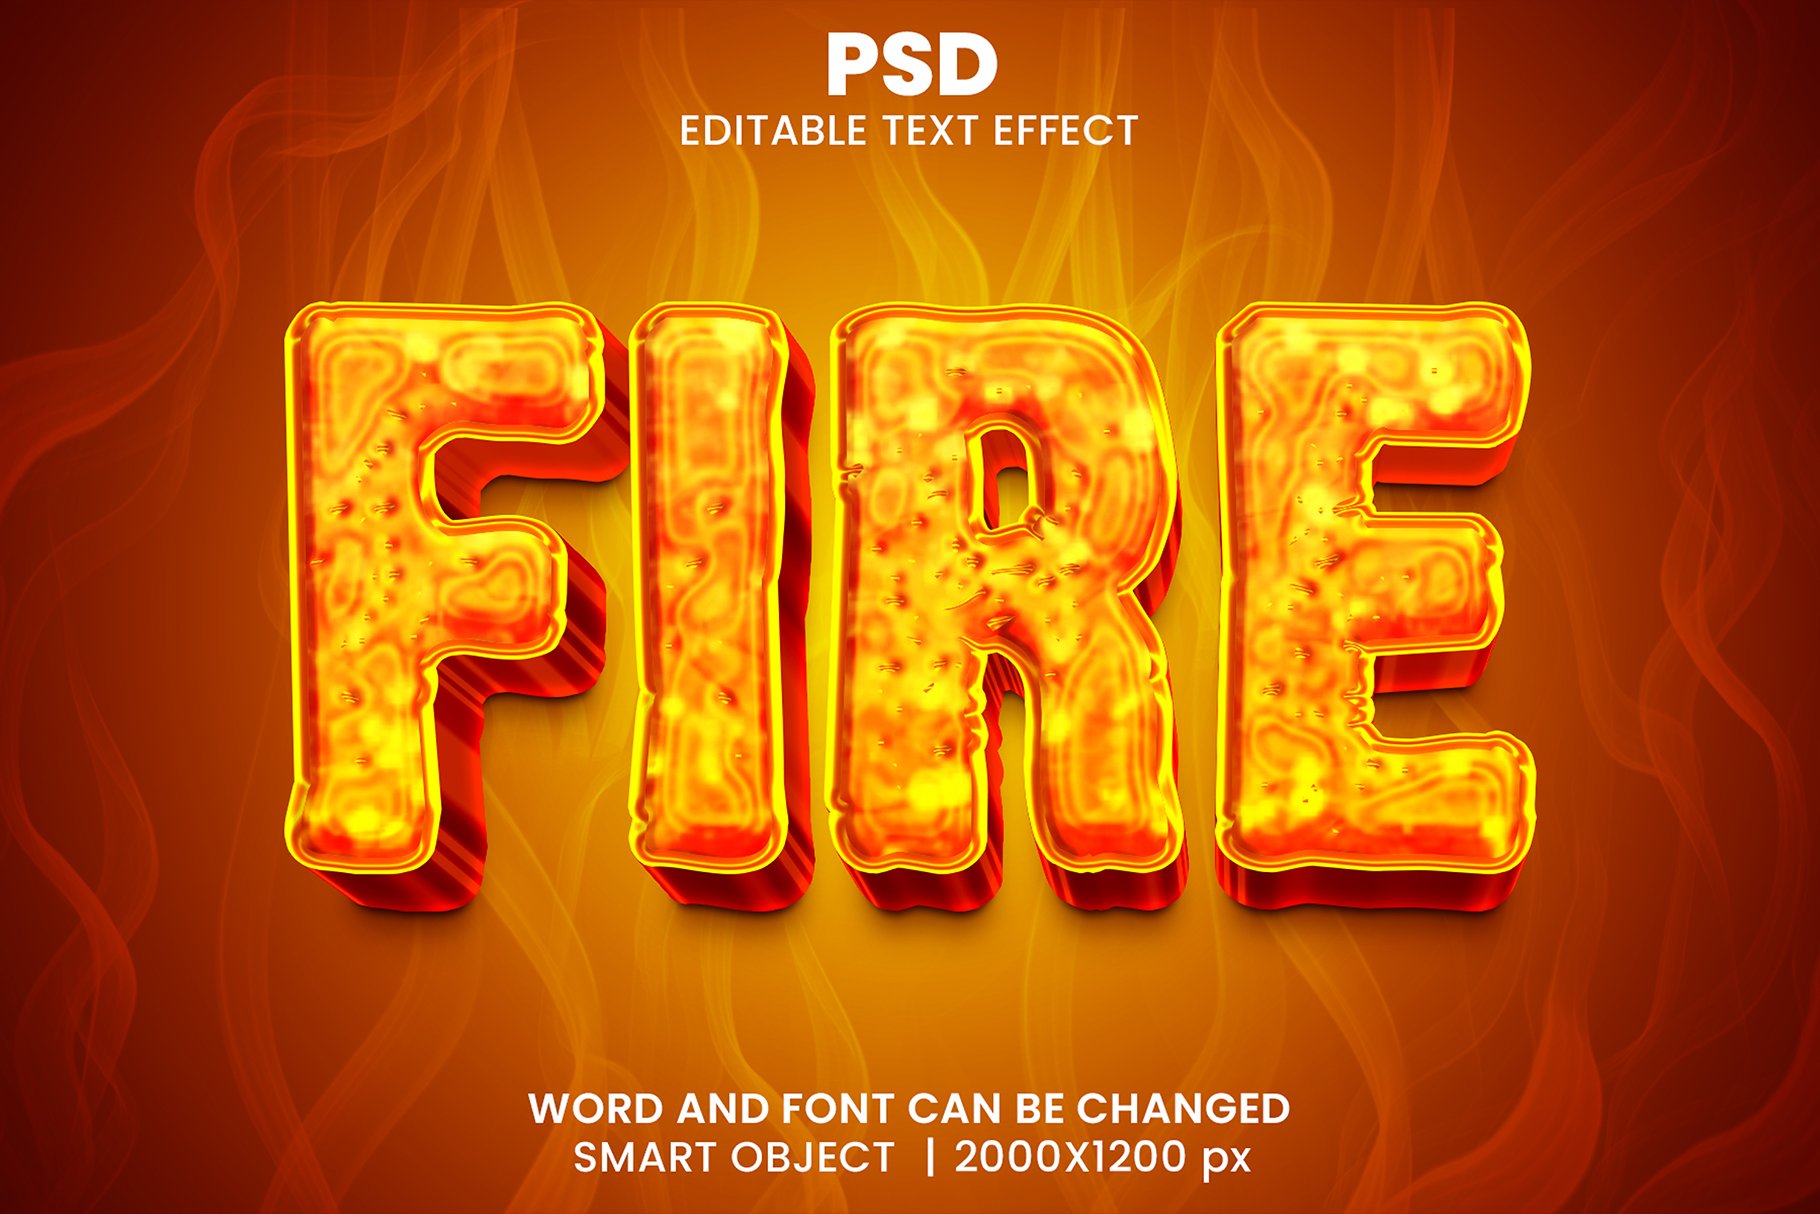 Fire 3d Editable Text Effect Stylecover image.